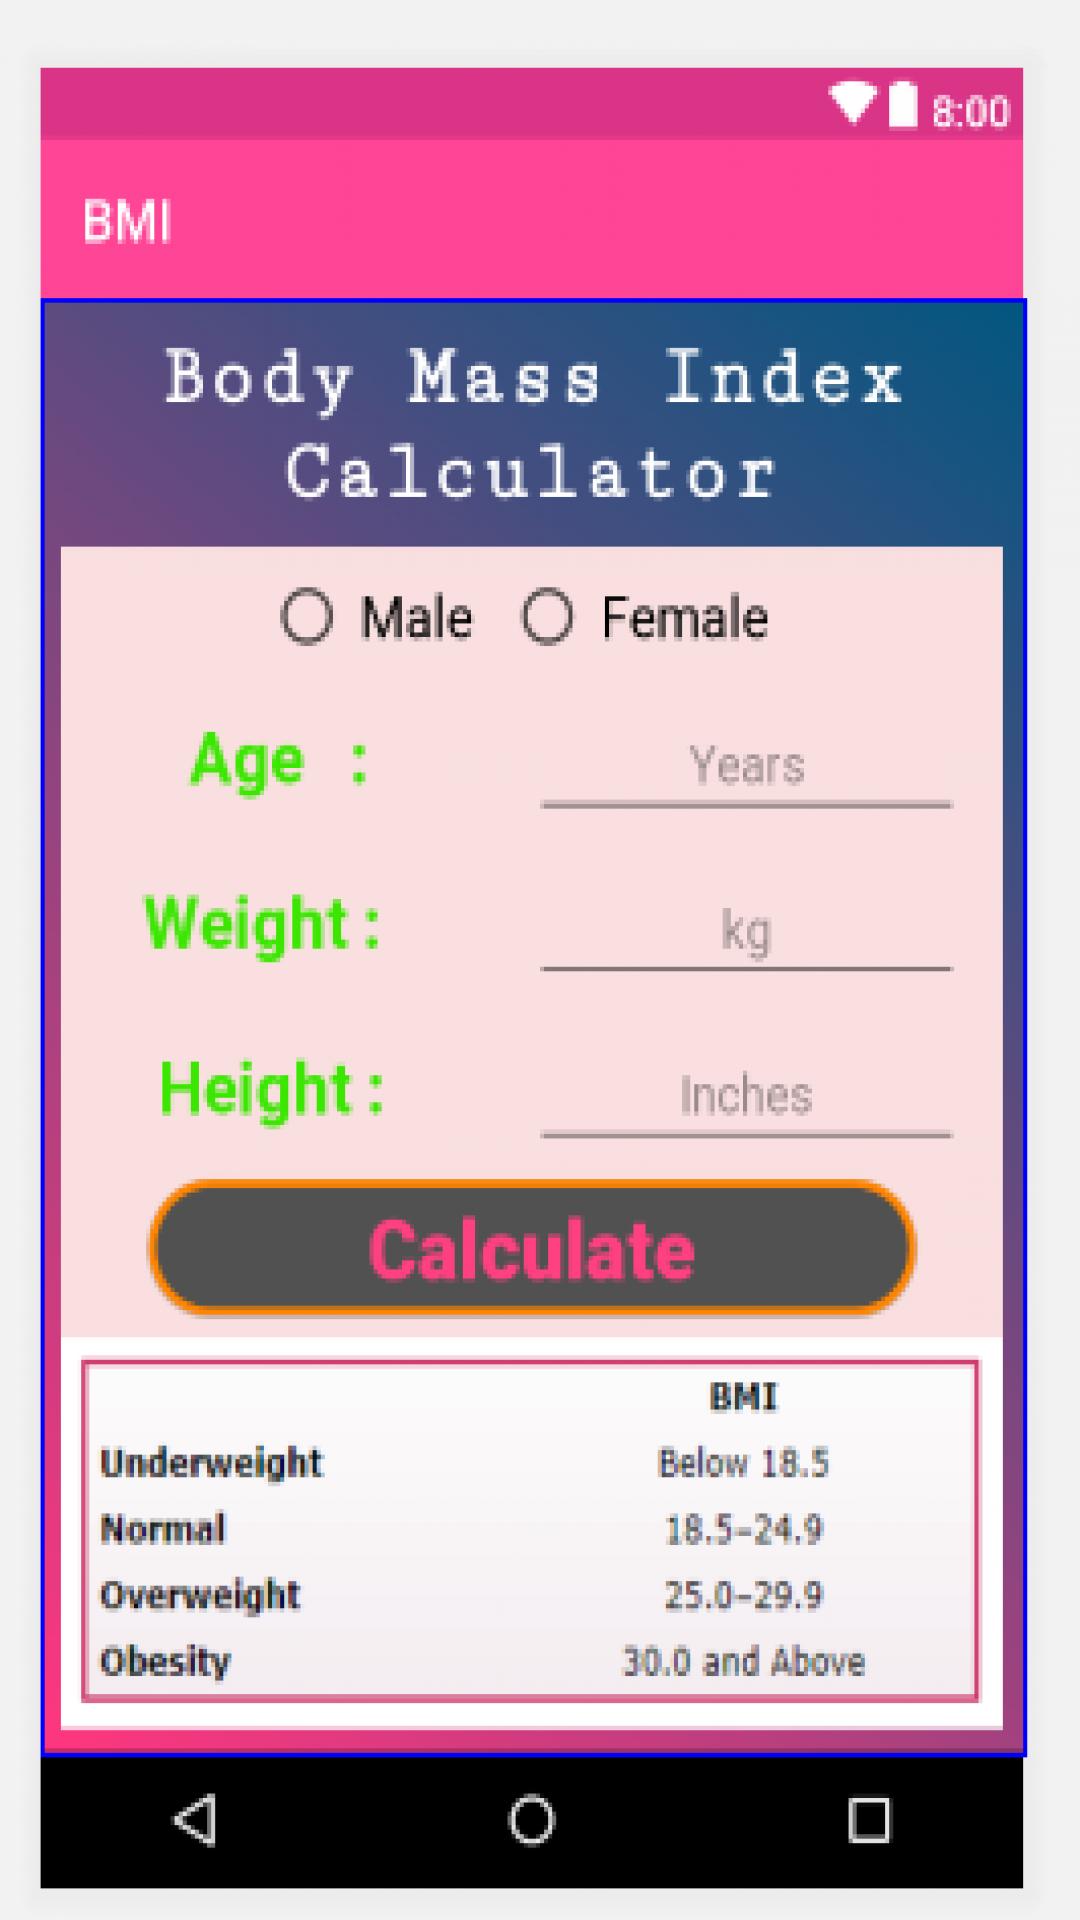 Bmi Calculator Body Mass Index For Android Apk Download